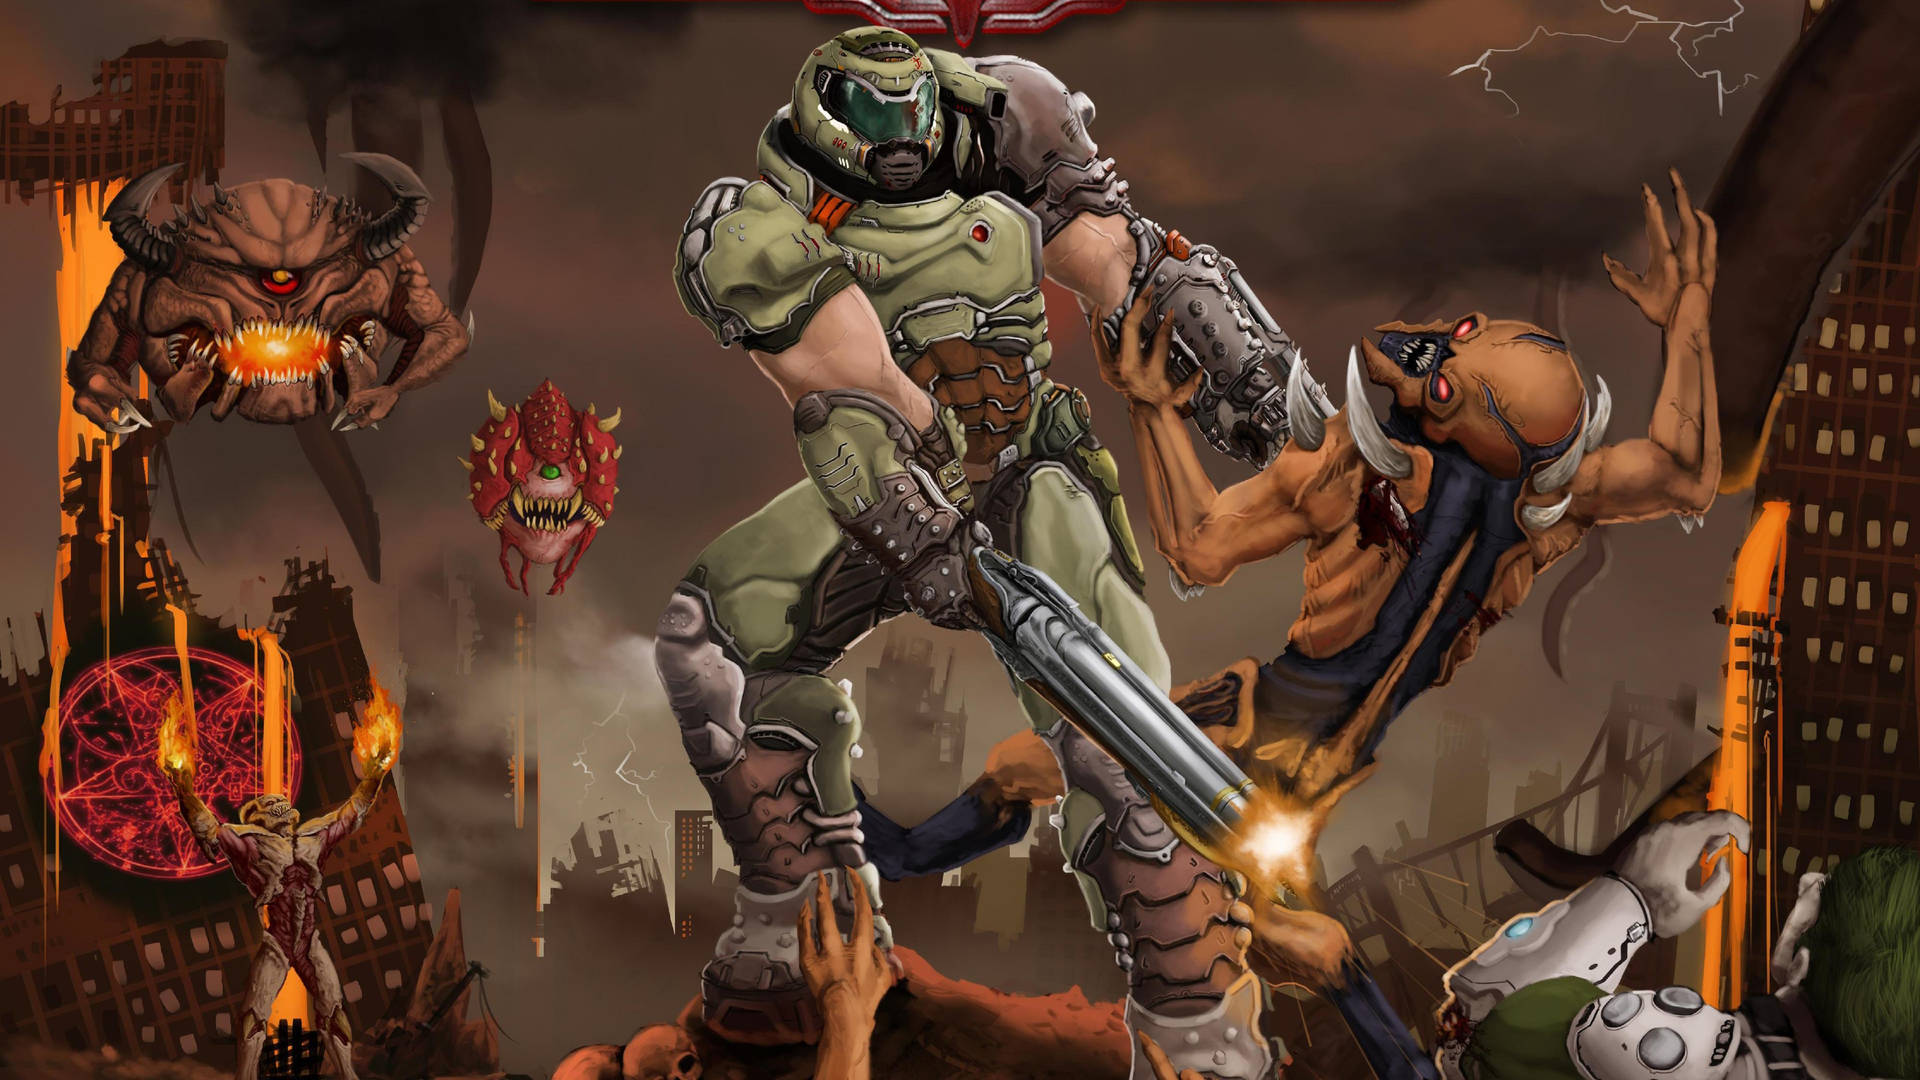 Doomguy In Action - Classic Video Game Cover Art Background